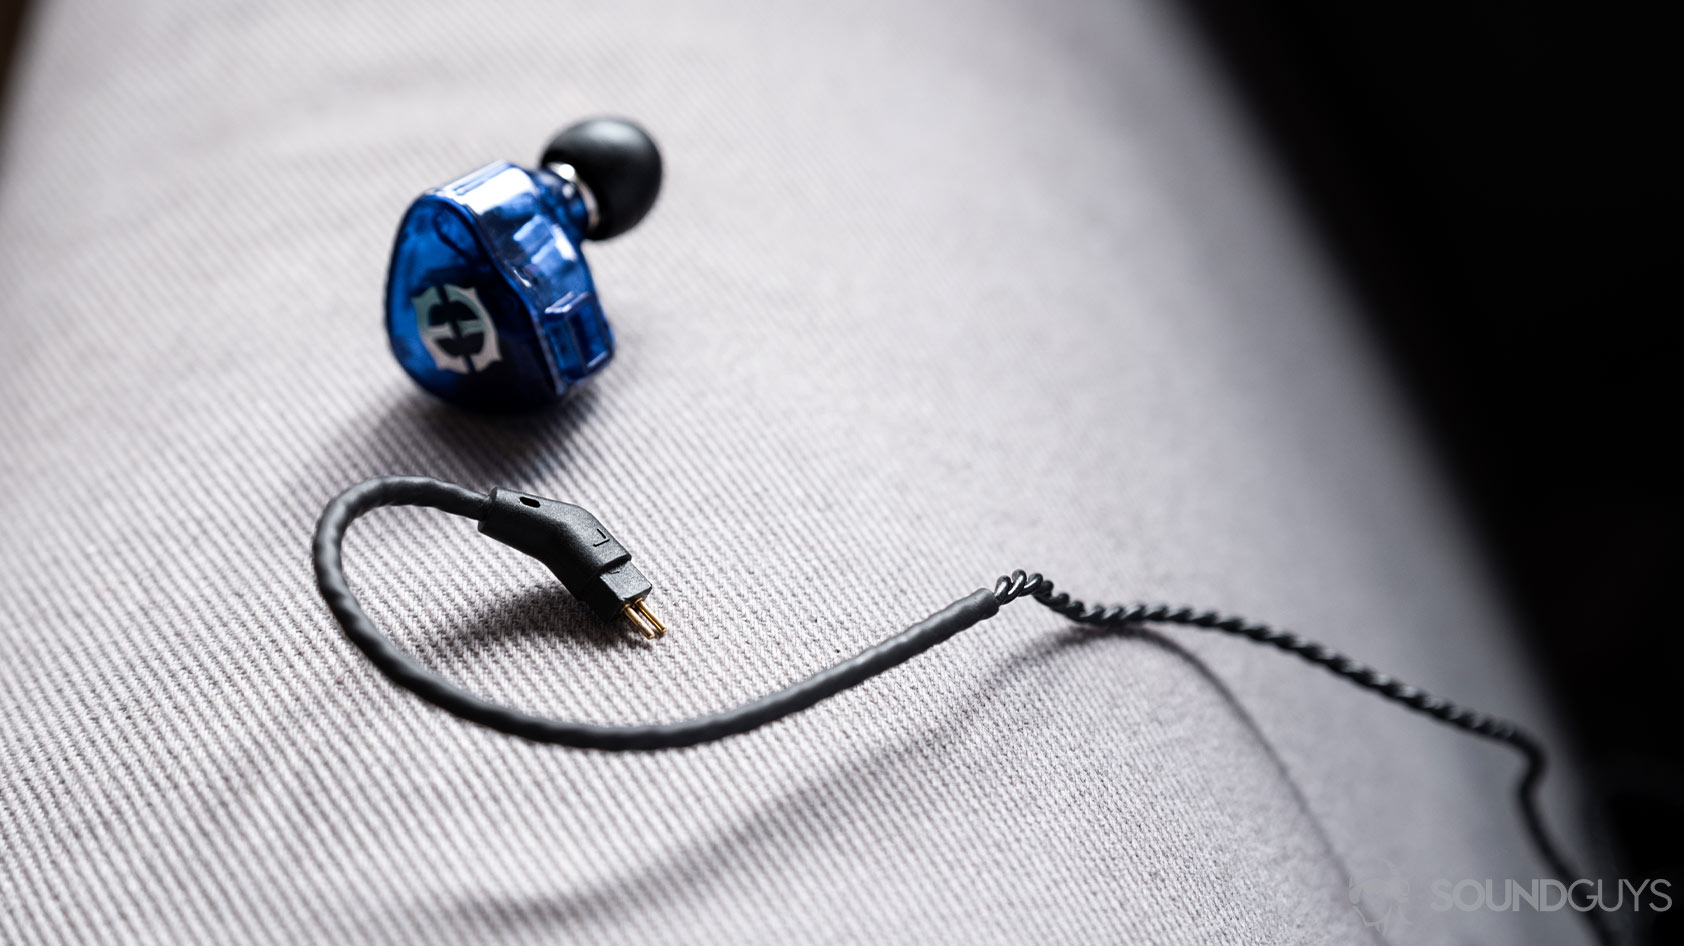 A close-up photo of the Massdrop x Empire Ears Zeus earbuds removable 2-pin cable.